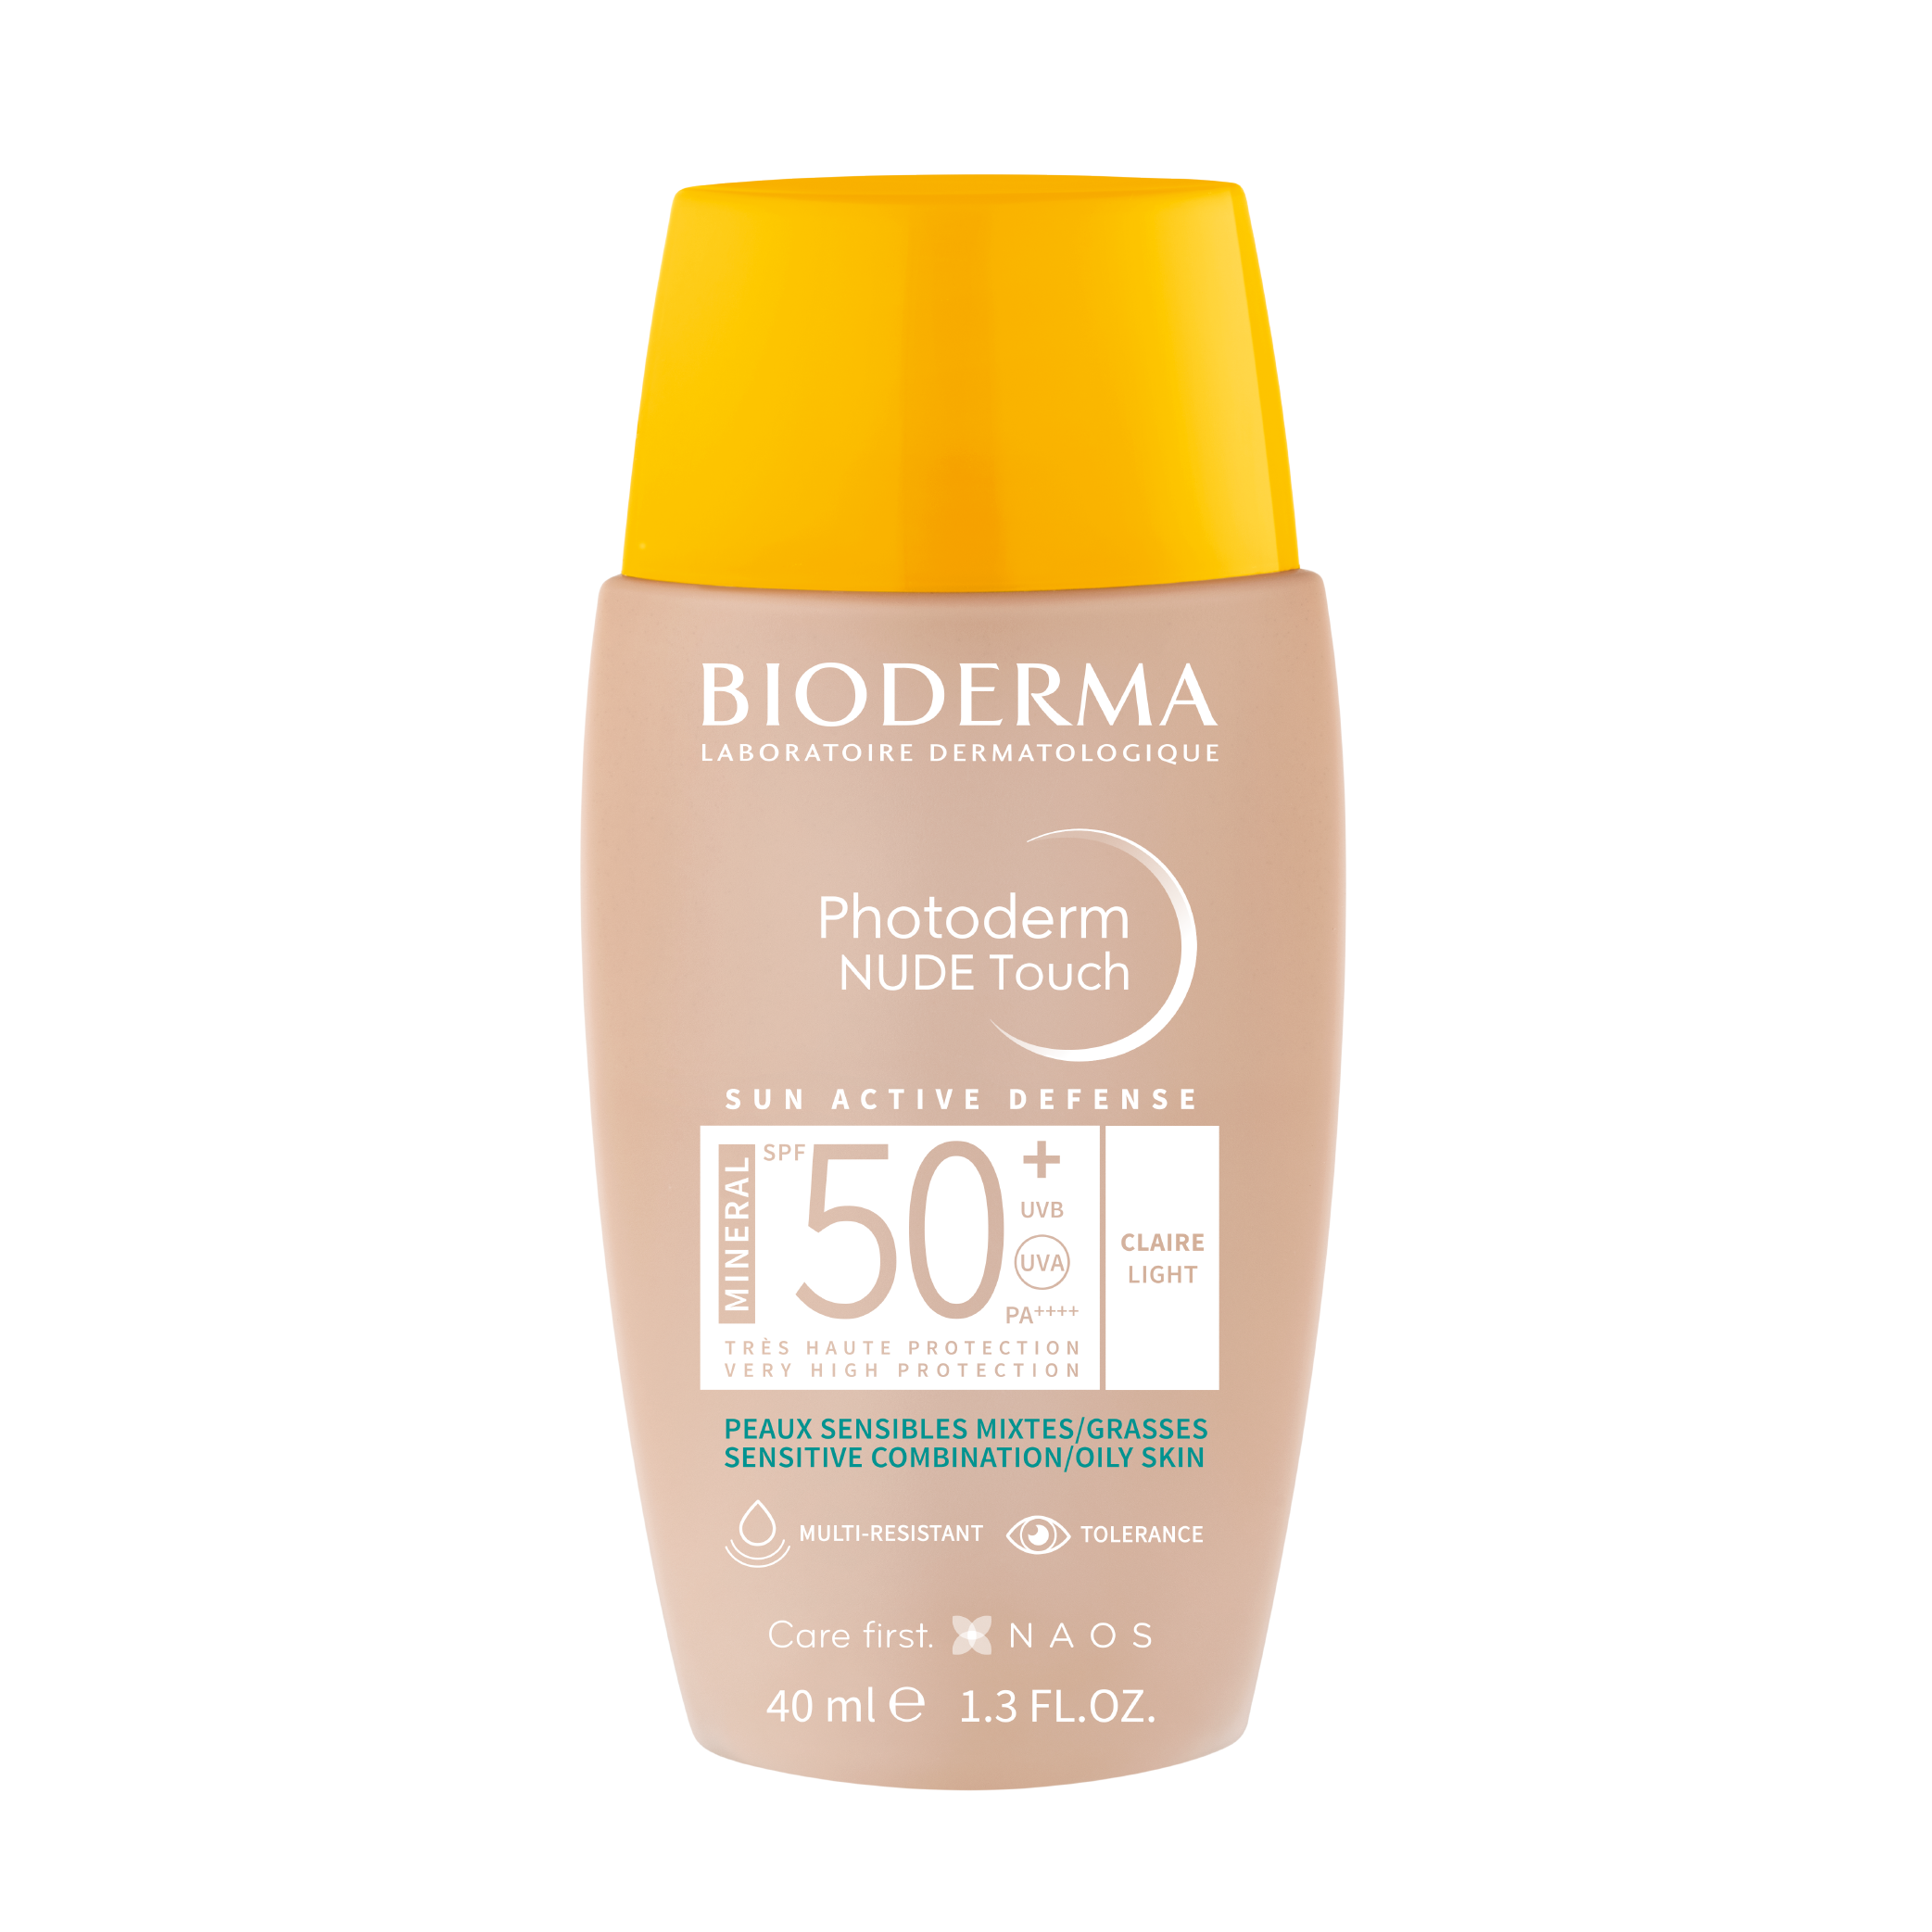 Photoderm Nude Touch SPF 50+ Teinte Claire Light 40ml - DermaHope Perú